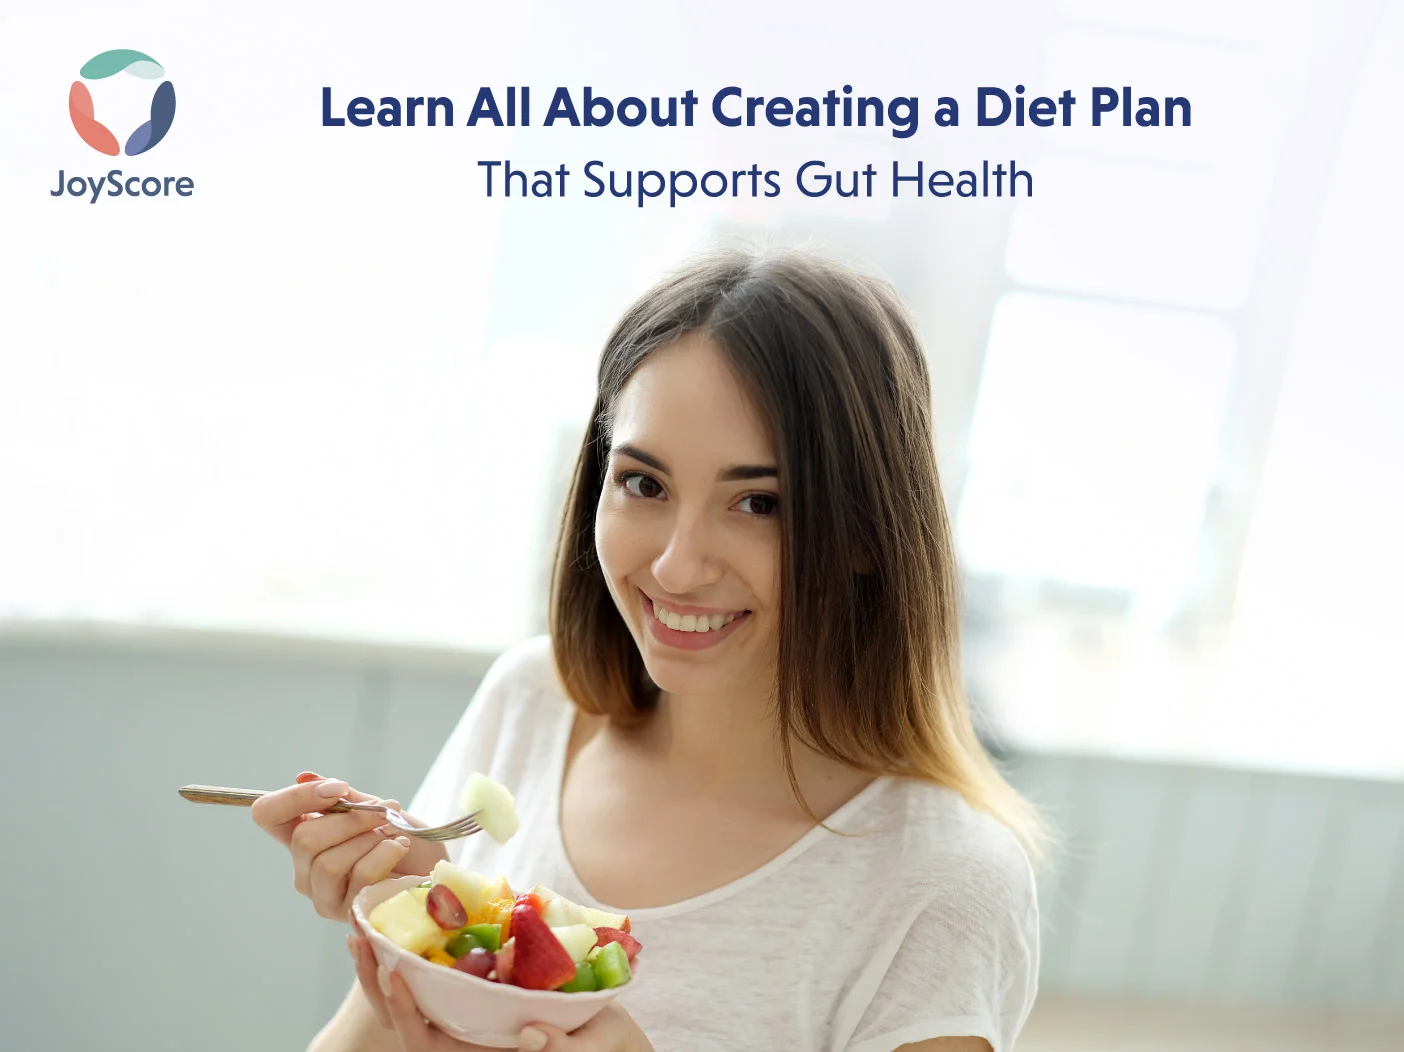 Learn Creating a Diet Plan that Supports Gut Health